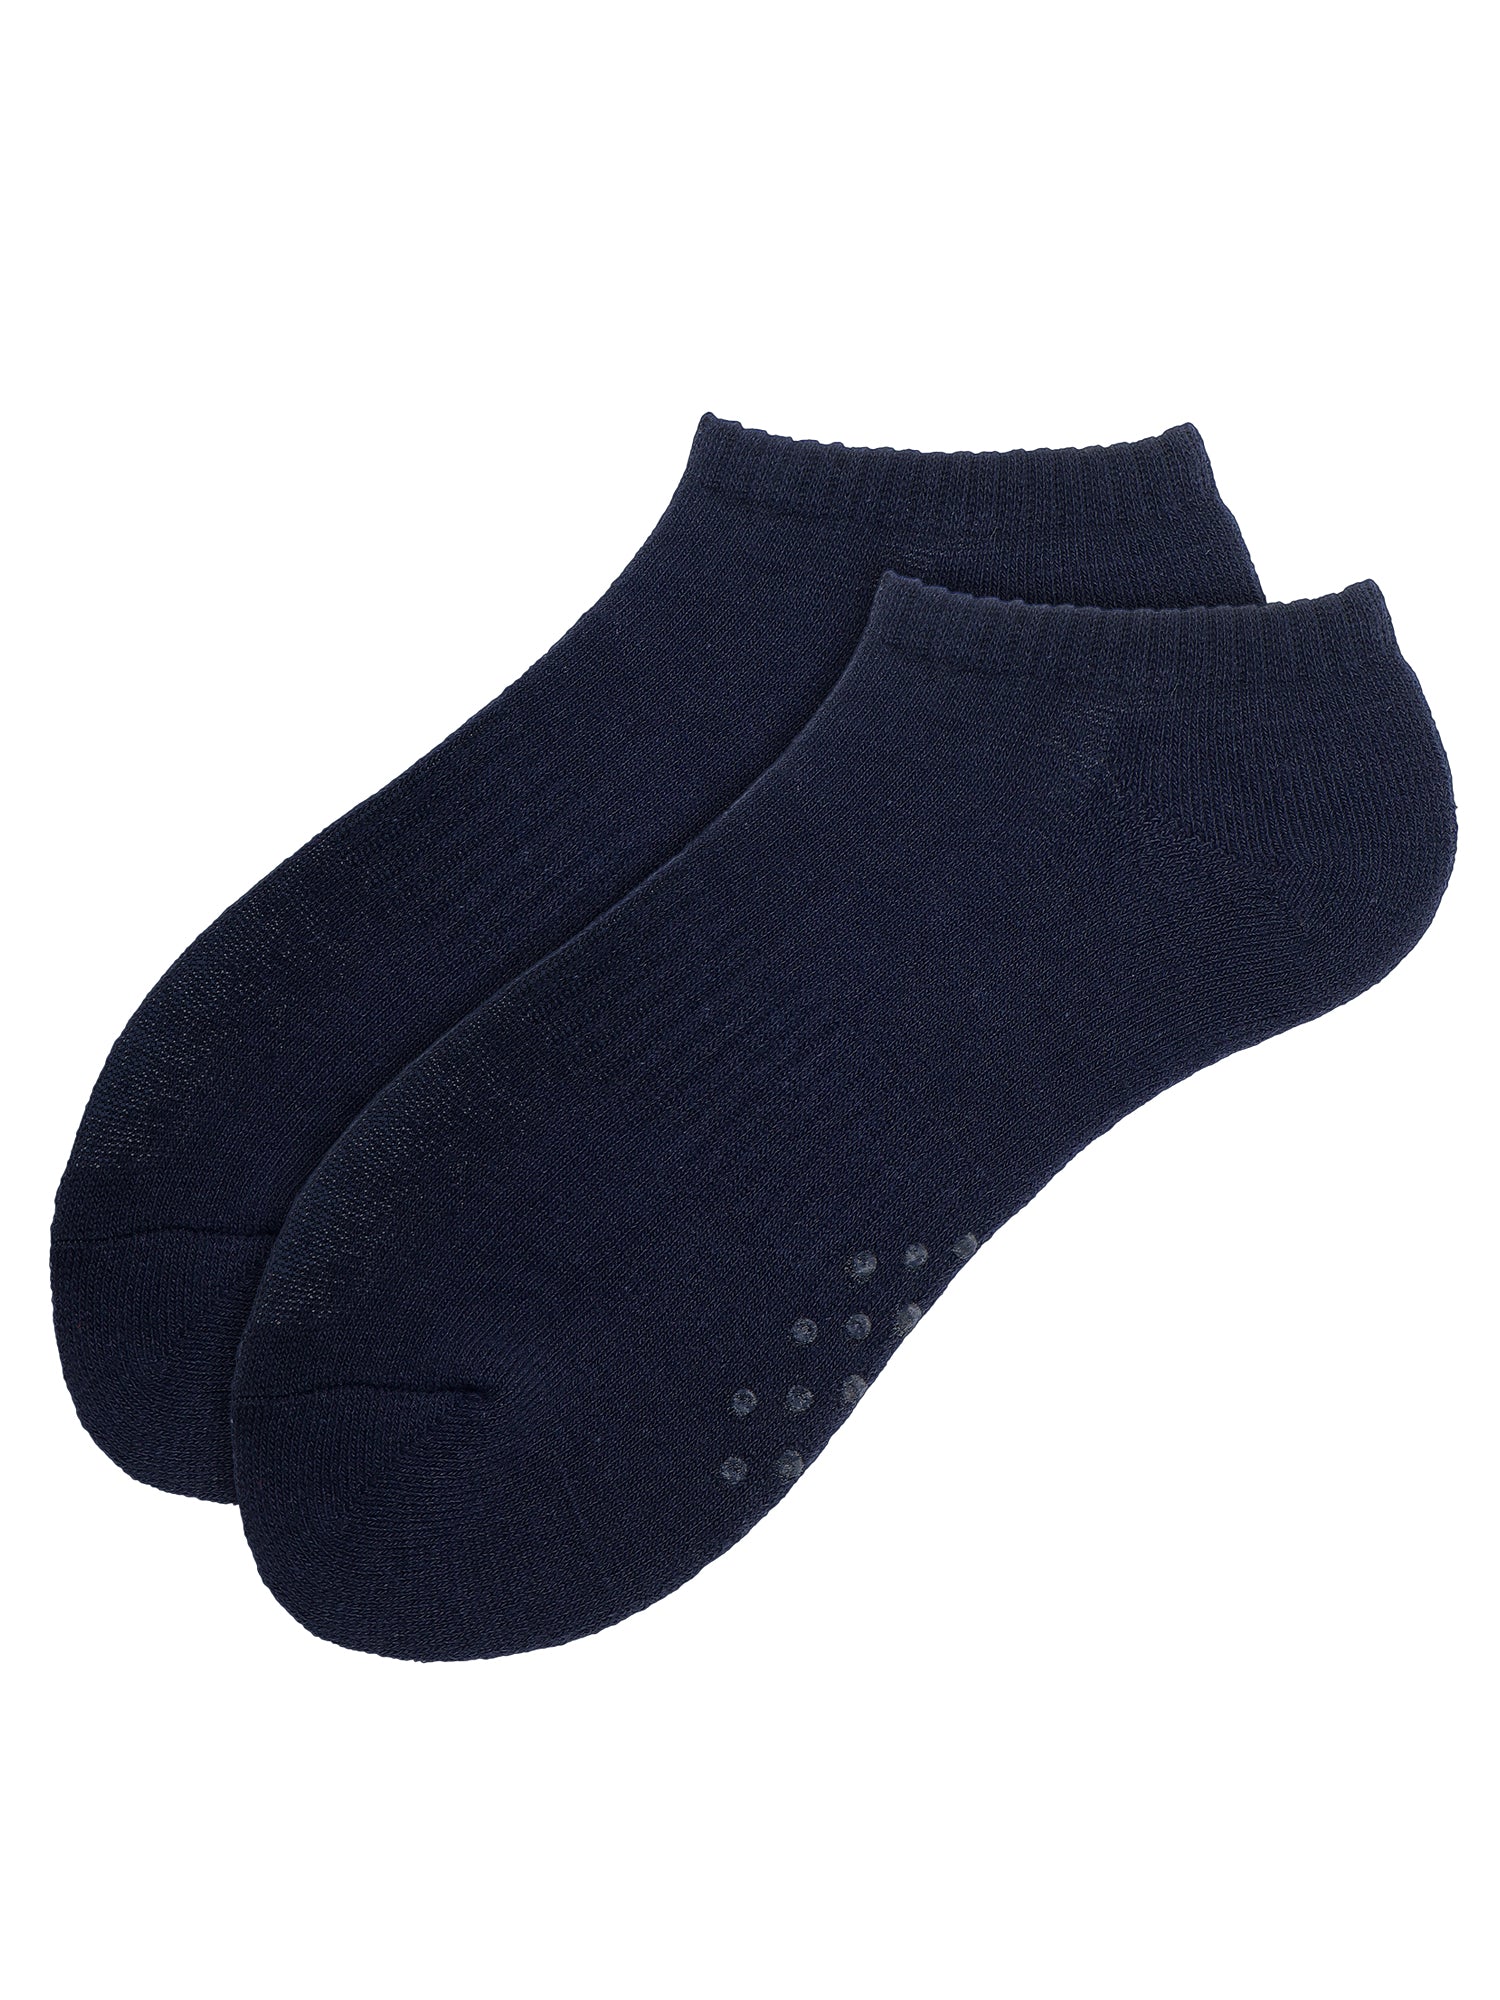 Grippers | Classic Box Of 4 Pairs | Low Cut Lounging Socks